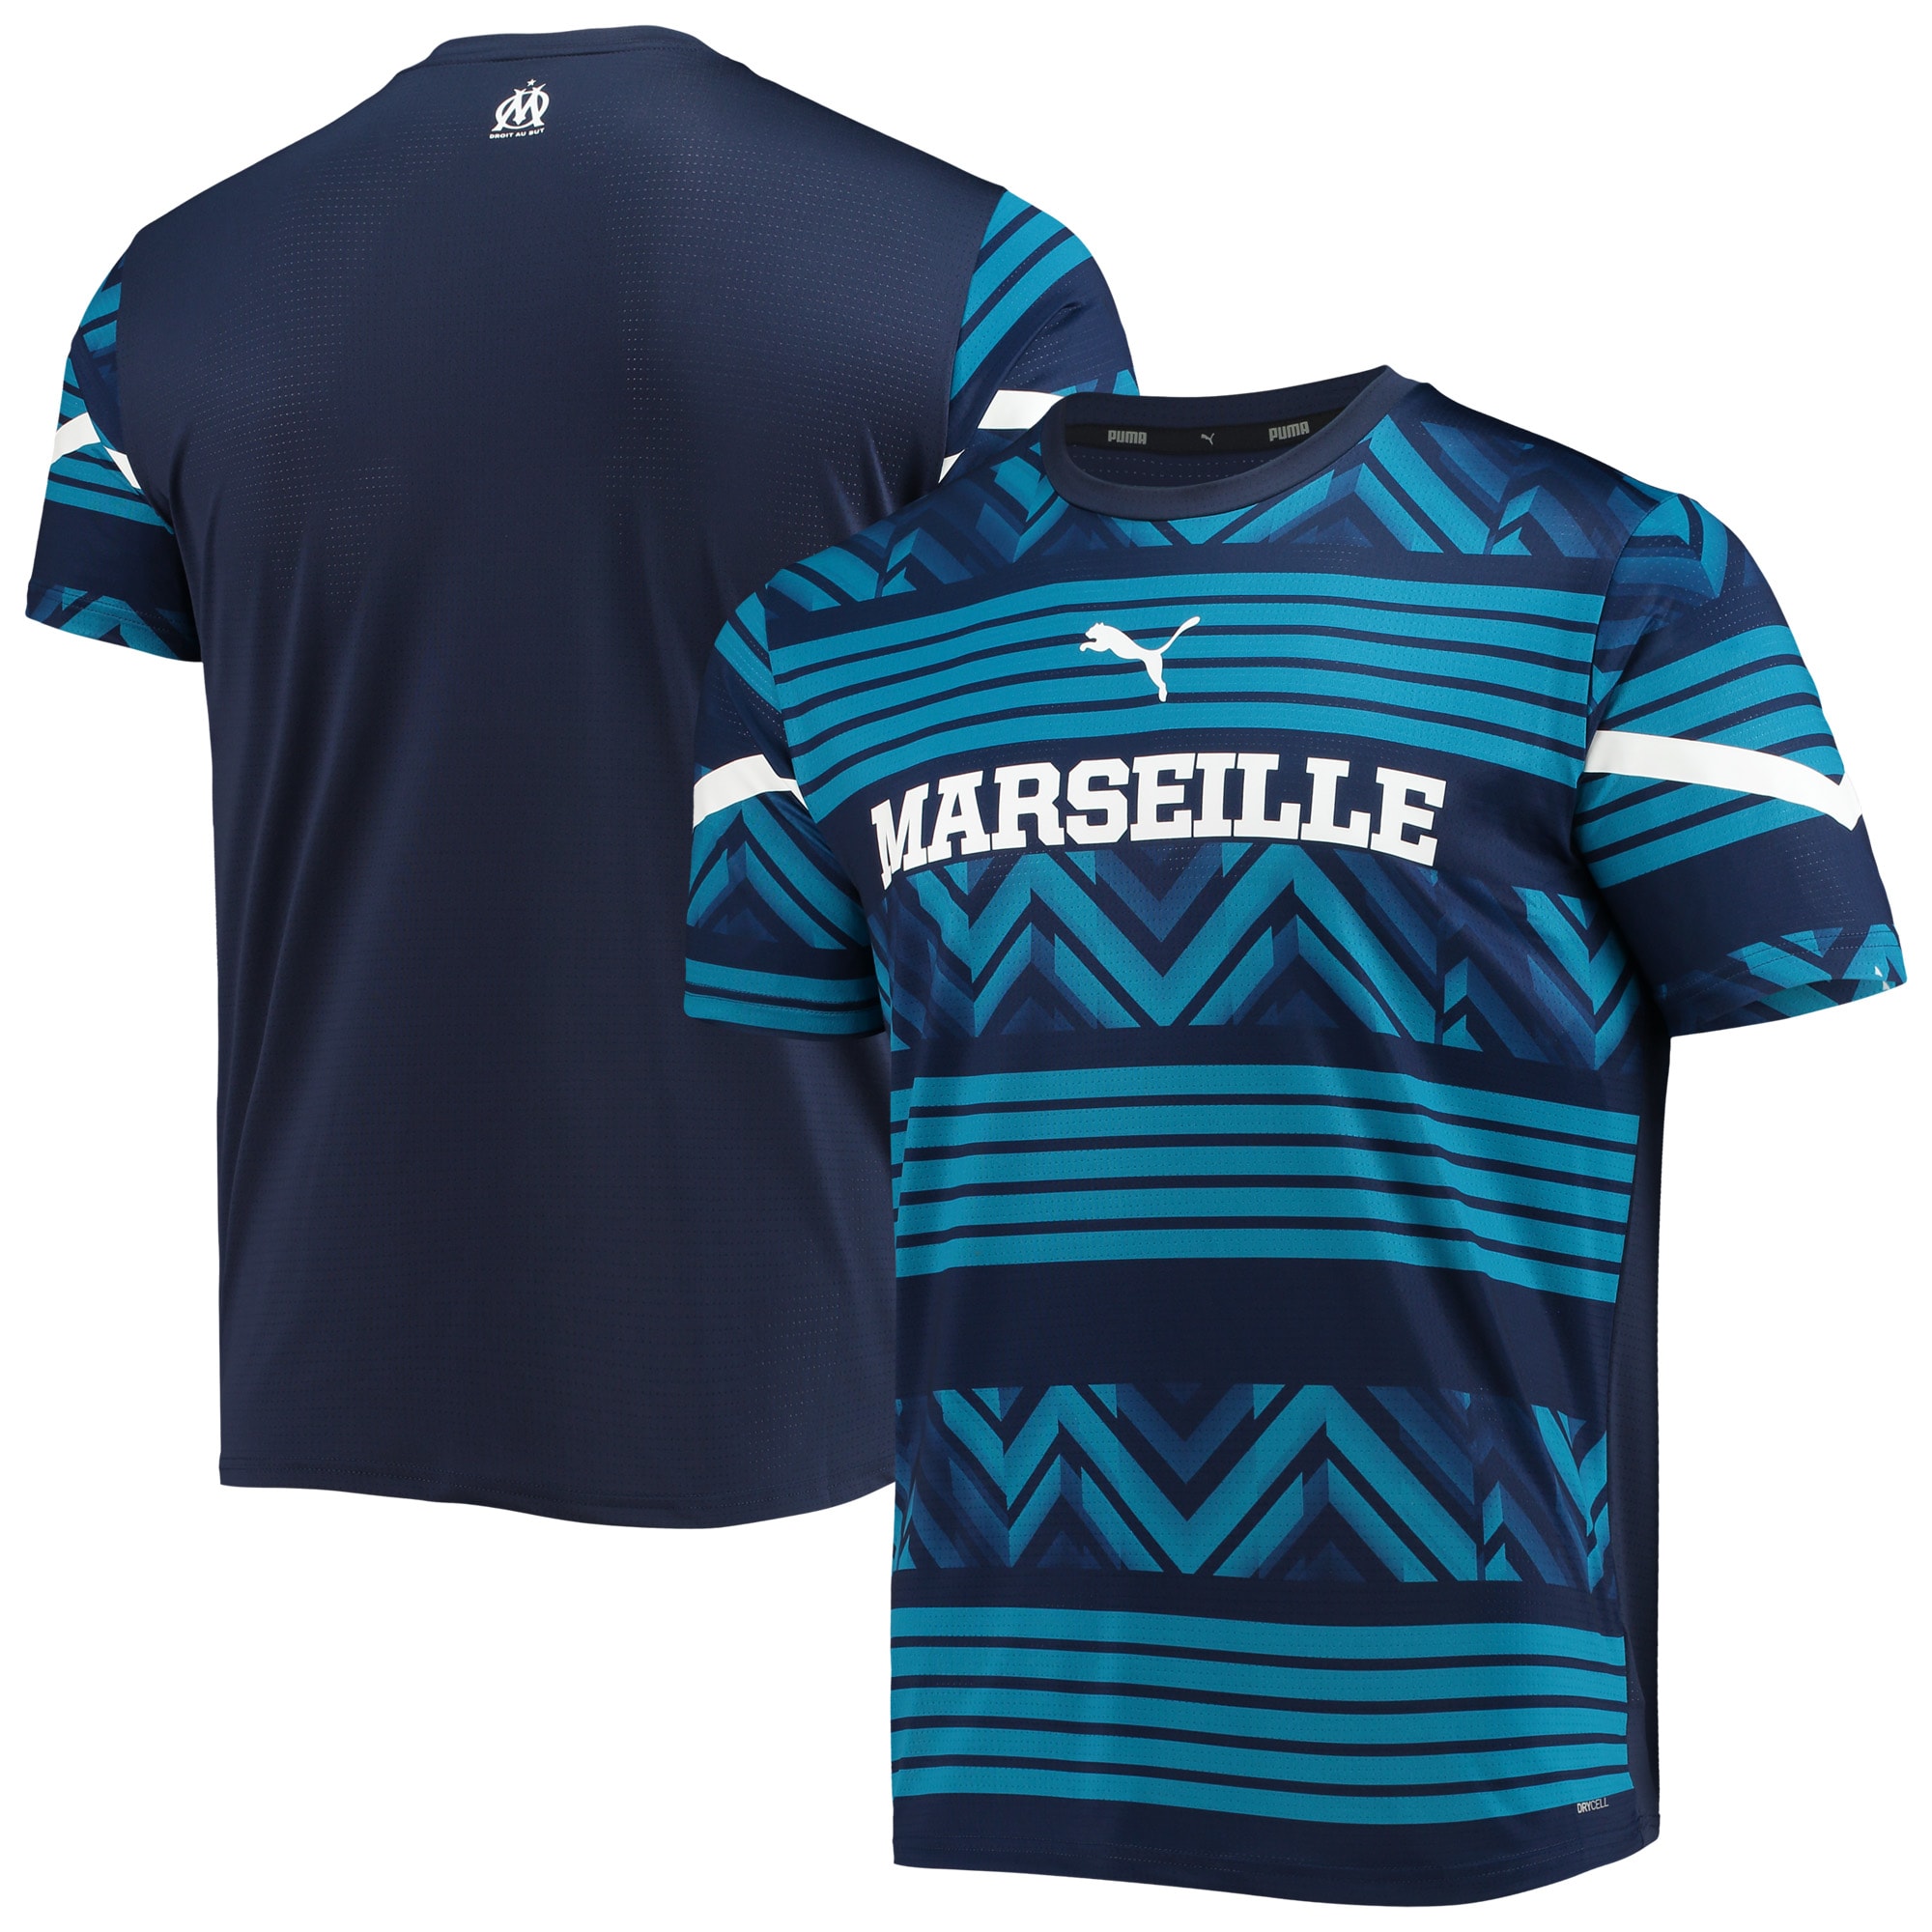 Men's Olympique Marseille Jerseys Navy Pre-Match DryCELL Top Style